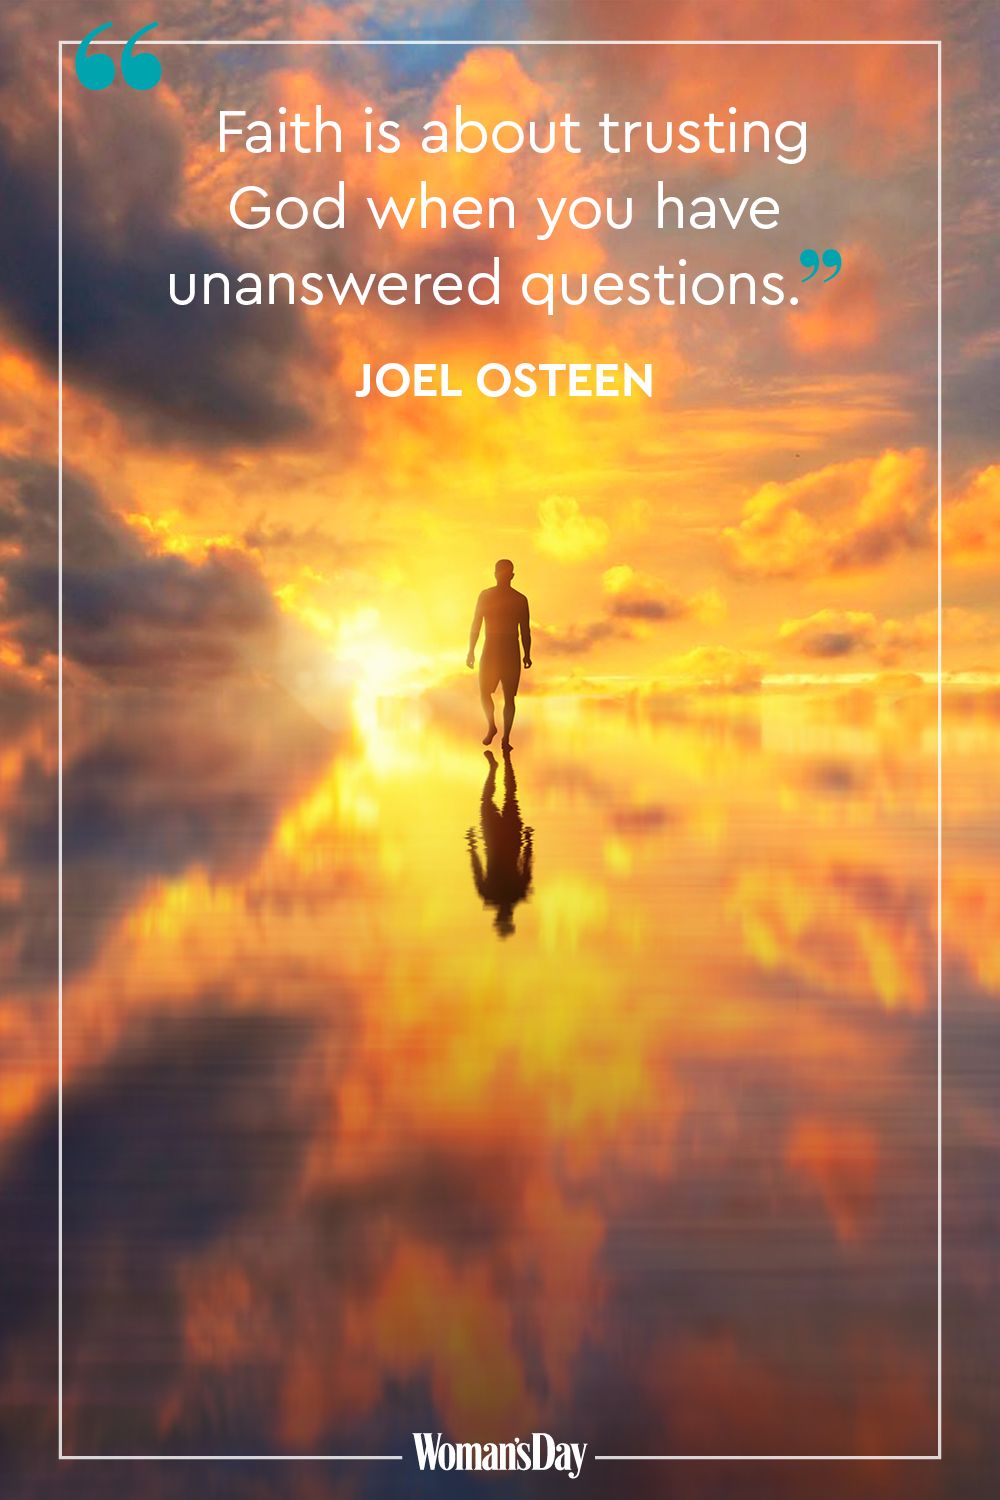 faith is about trusting god when you have unanswered questions. joel osteen